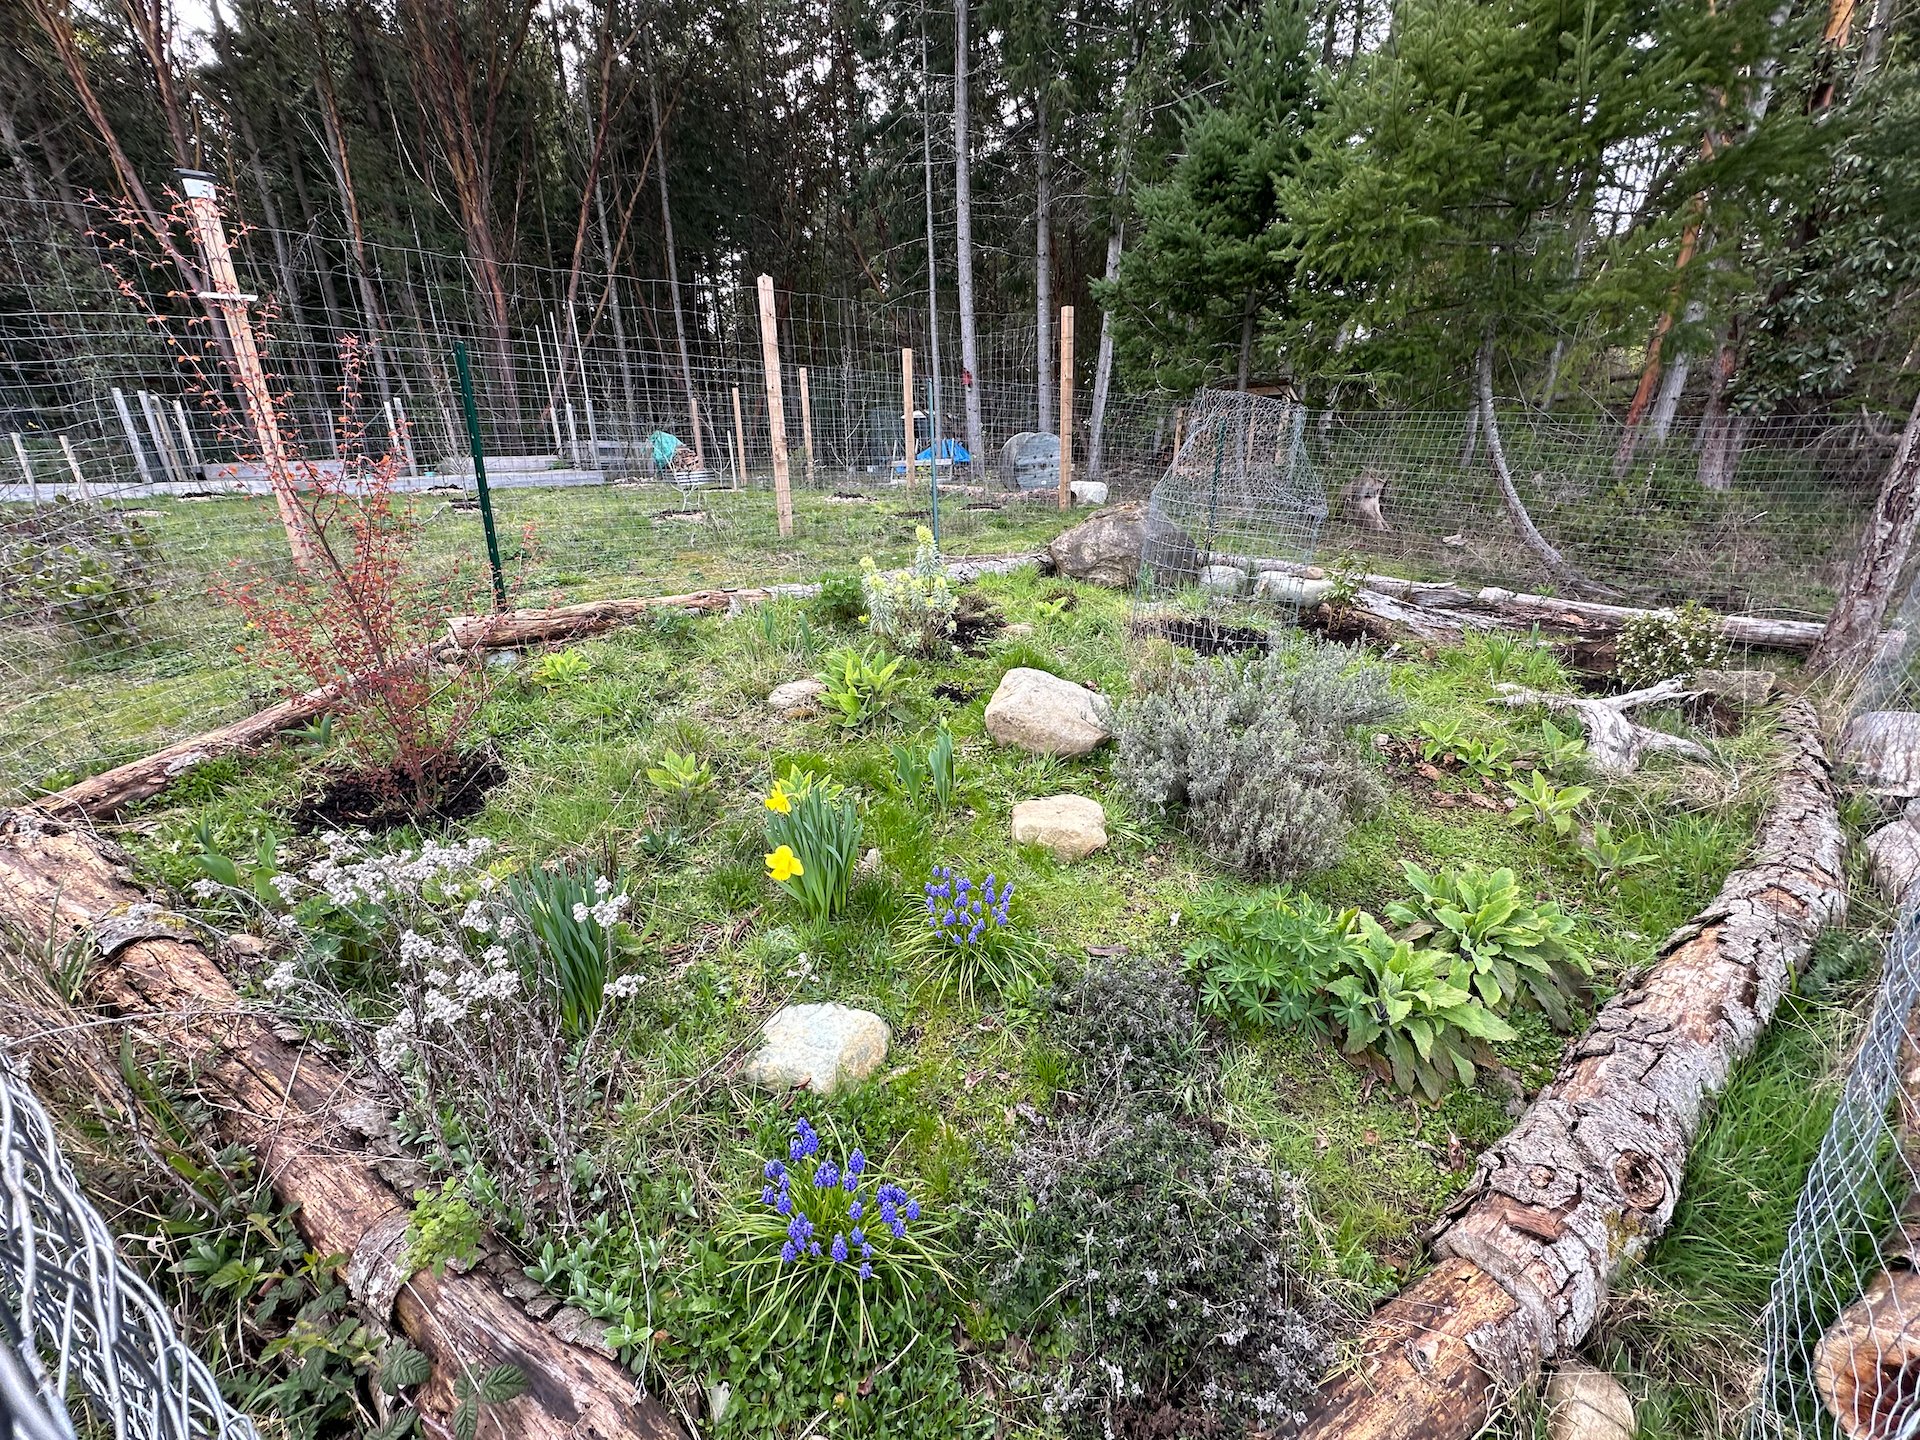  Justine’s “Deer Garden” is looking great. The two trees we planted in it are starting to really get to a nice size.  